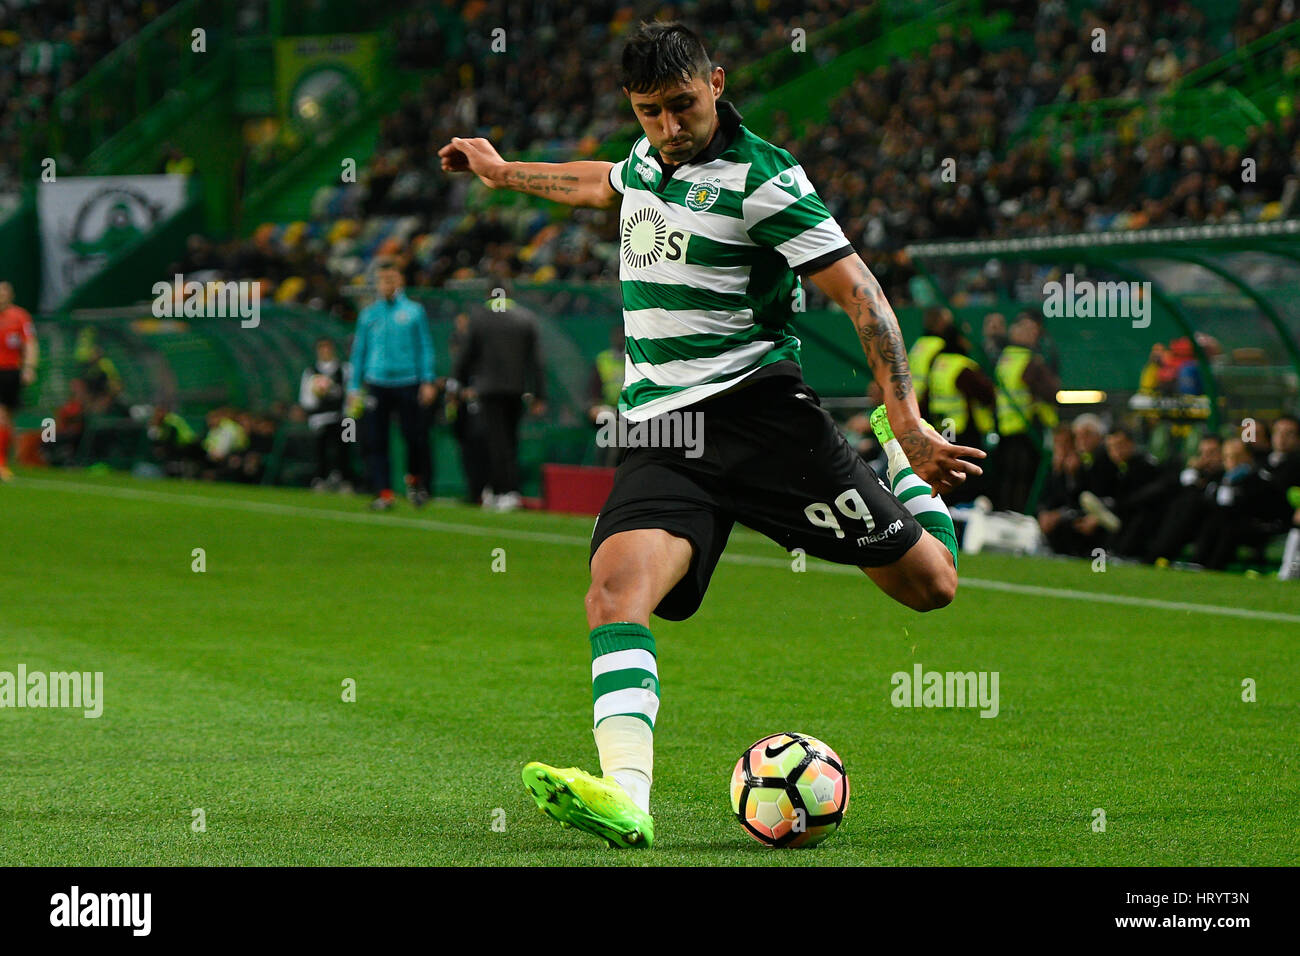 Portugal, Lisbon, Mar. 05, 2017 - FOOTBALL - Alan Ruiz, Sporting player, in action during match between Sporting Clube de Portugal and Vitória Guimarães for Portuguese Football League match at Estádio Alvalade XXI, in Lisbon, Portugal. Credit: Bruno de Carvalho/Alamy Live News Stock Photo